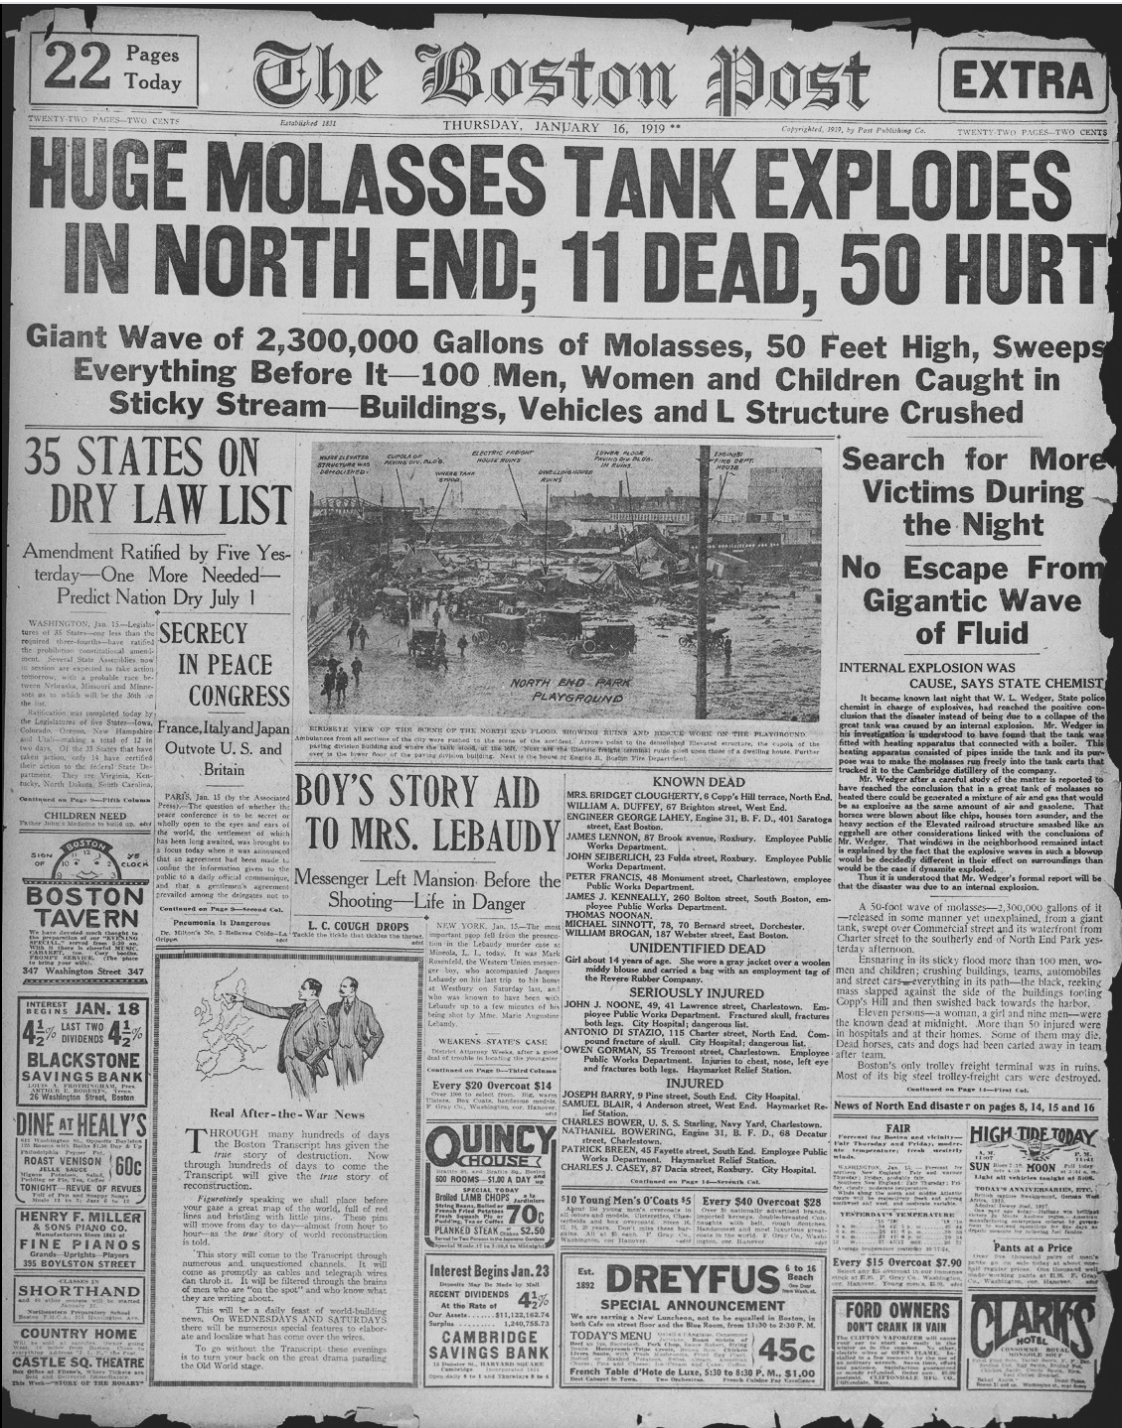 The cover of the Boston Post after the tragedy reading Huge Molasses Tank explodes in North End; 11 dead, 50 hurt